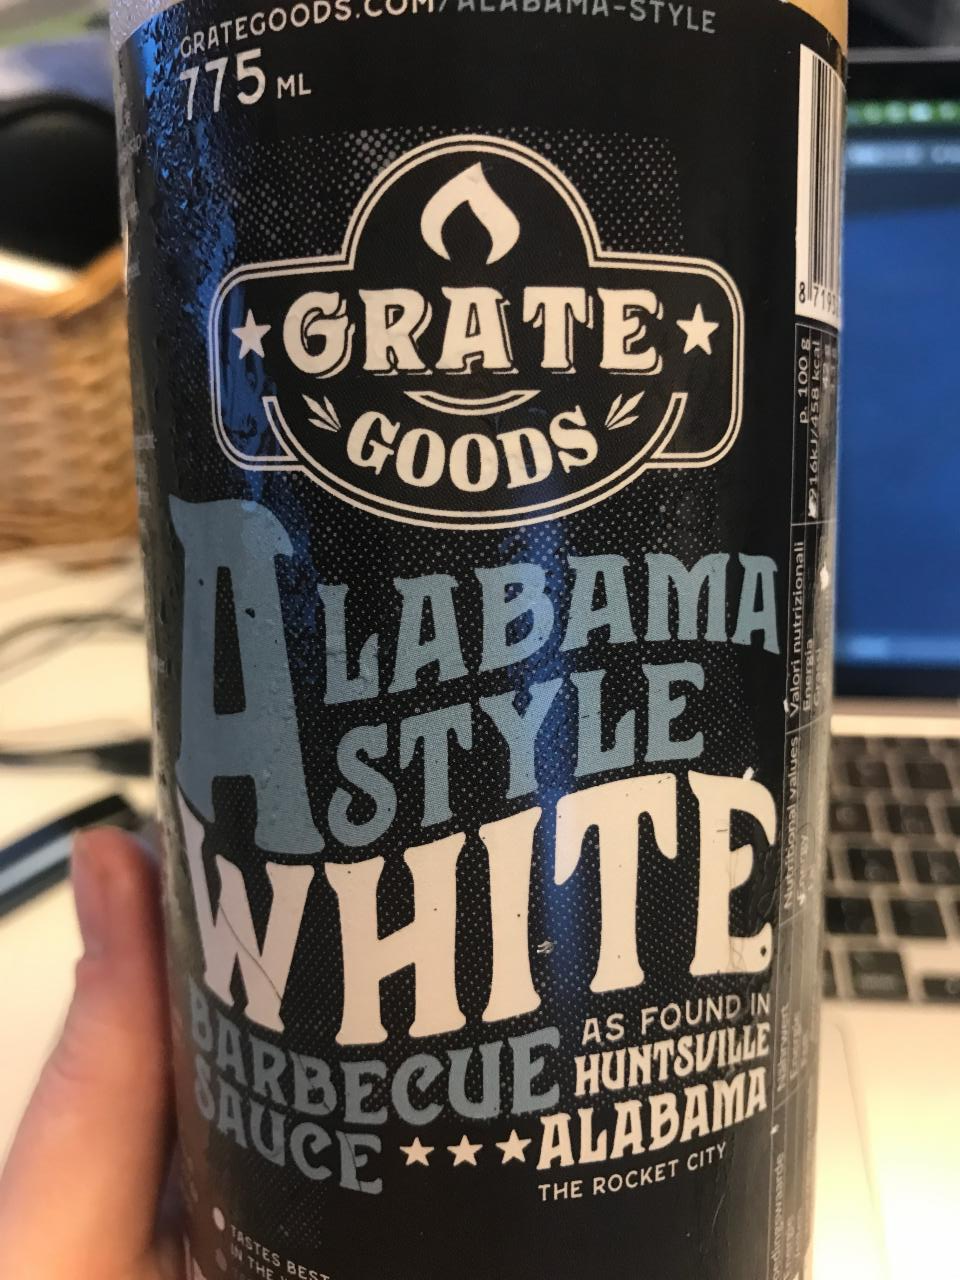 Fotografie - Alabama Style White Barbecue Sauce Grate Goods